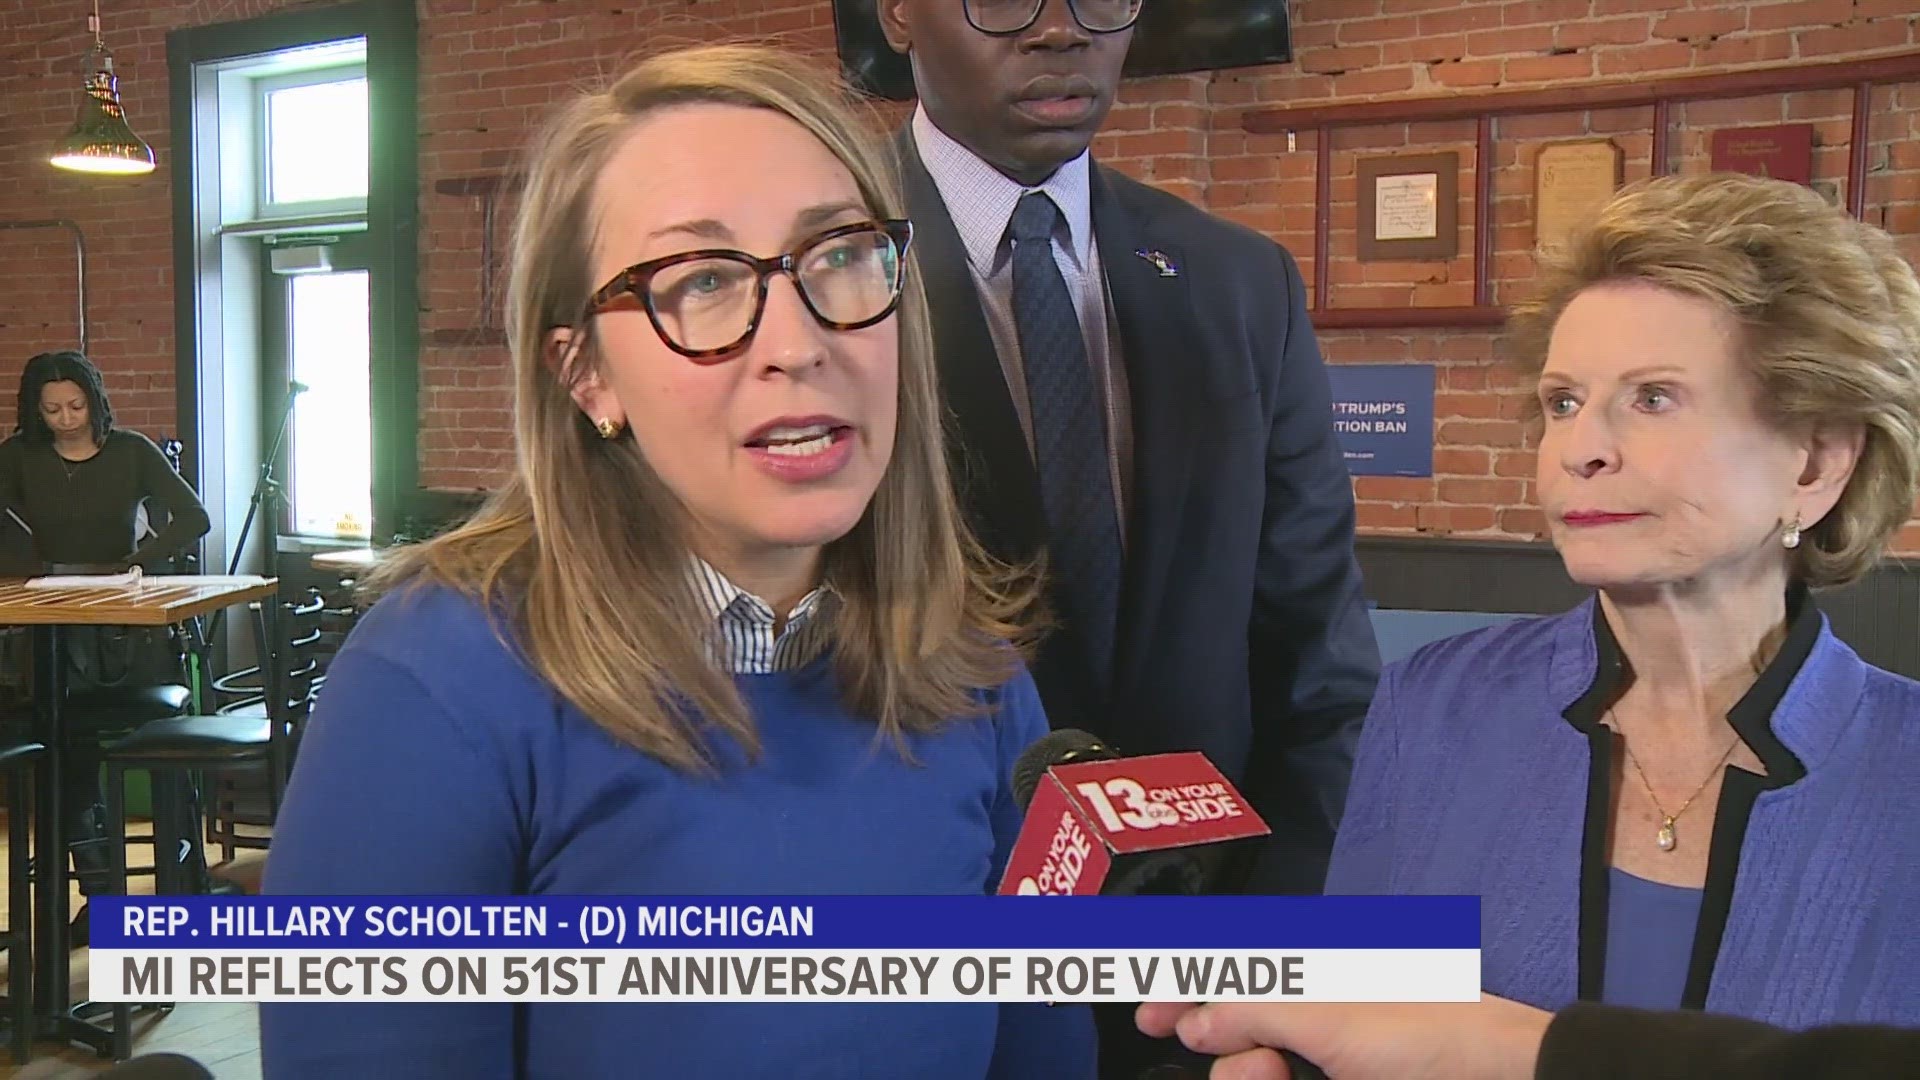 Lawmakers and citizens gathered, reflecting on Roe V Wade 51 years after it was first passed.